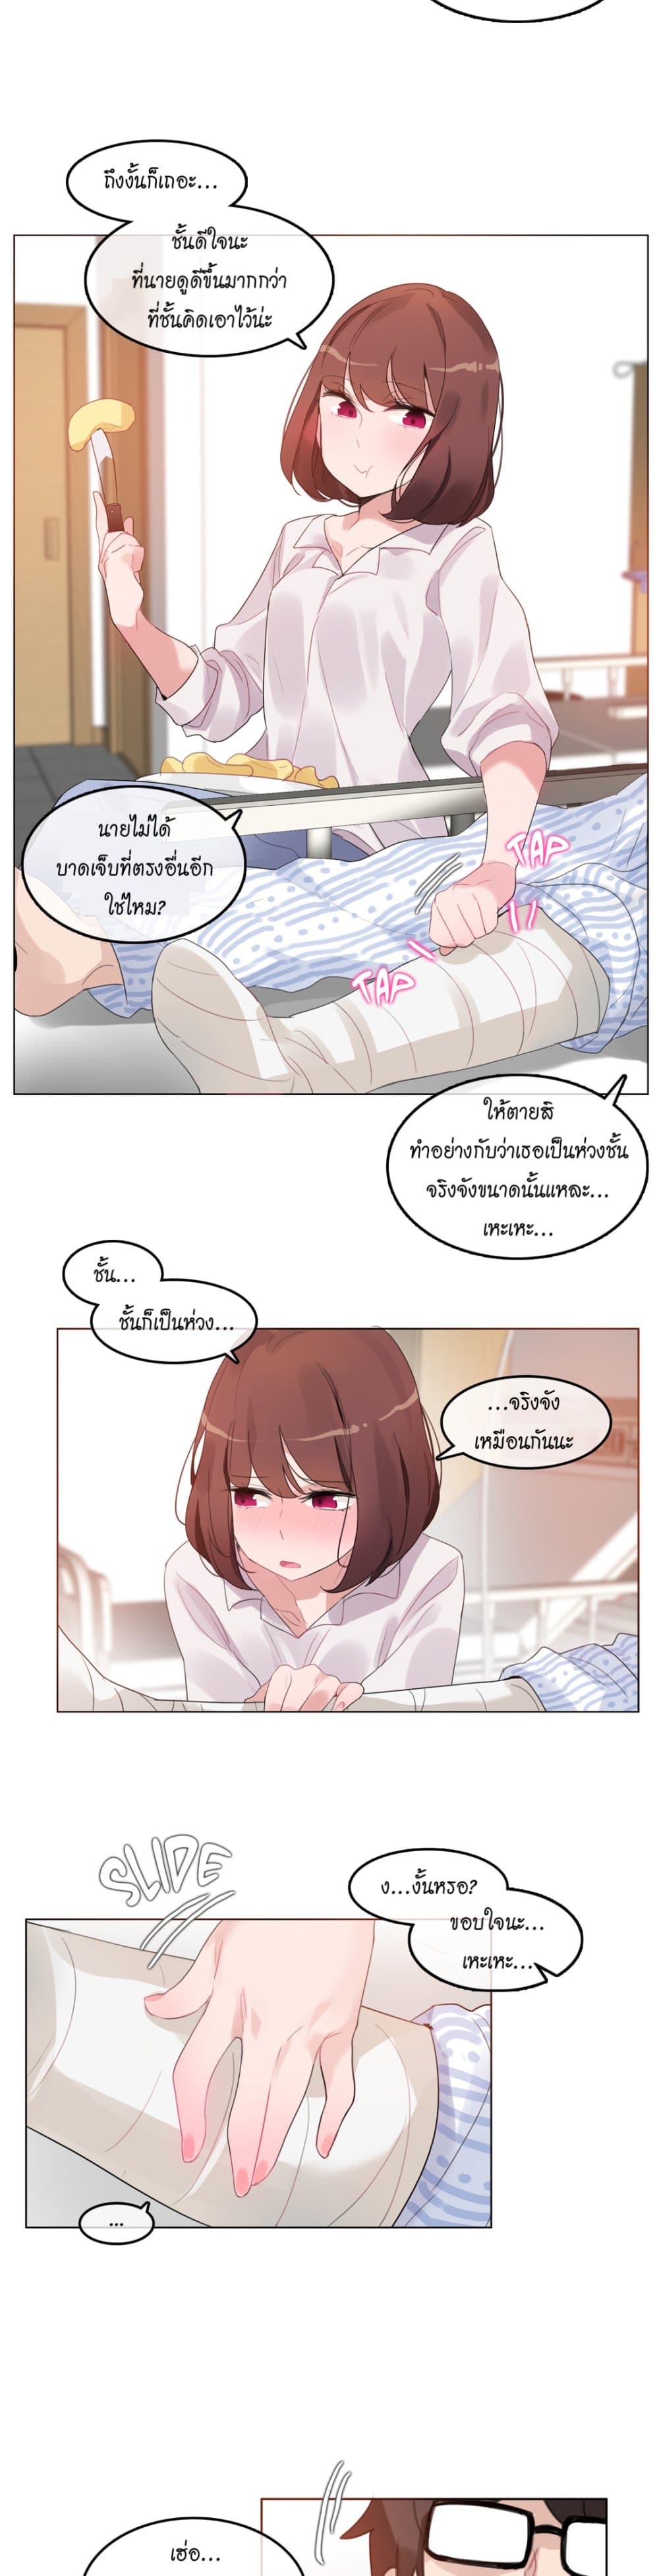 A Pervert's Daily Life 46-46